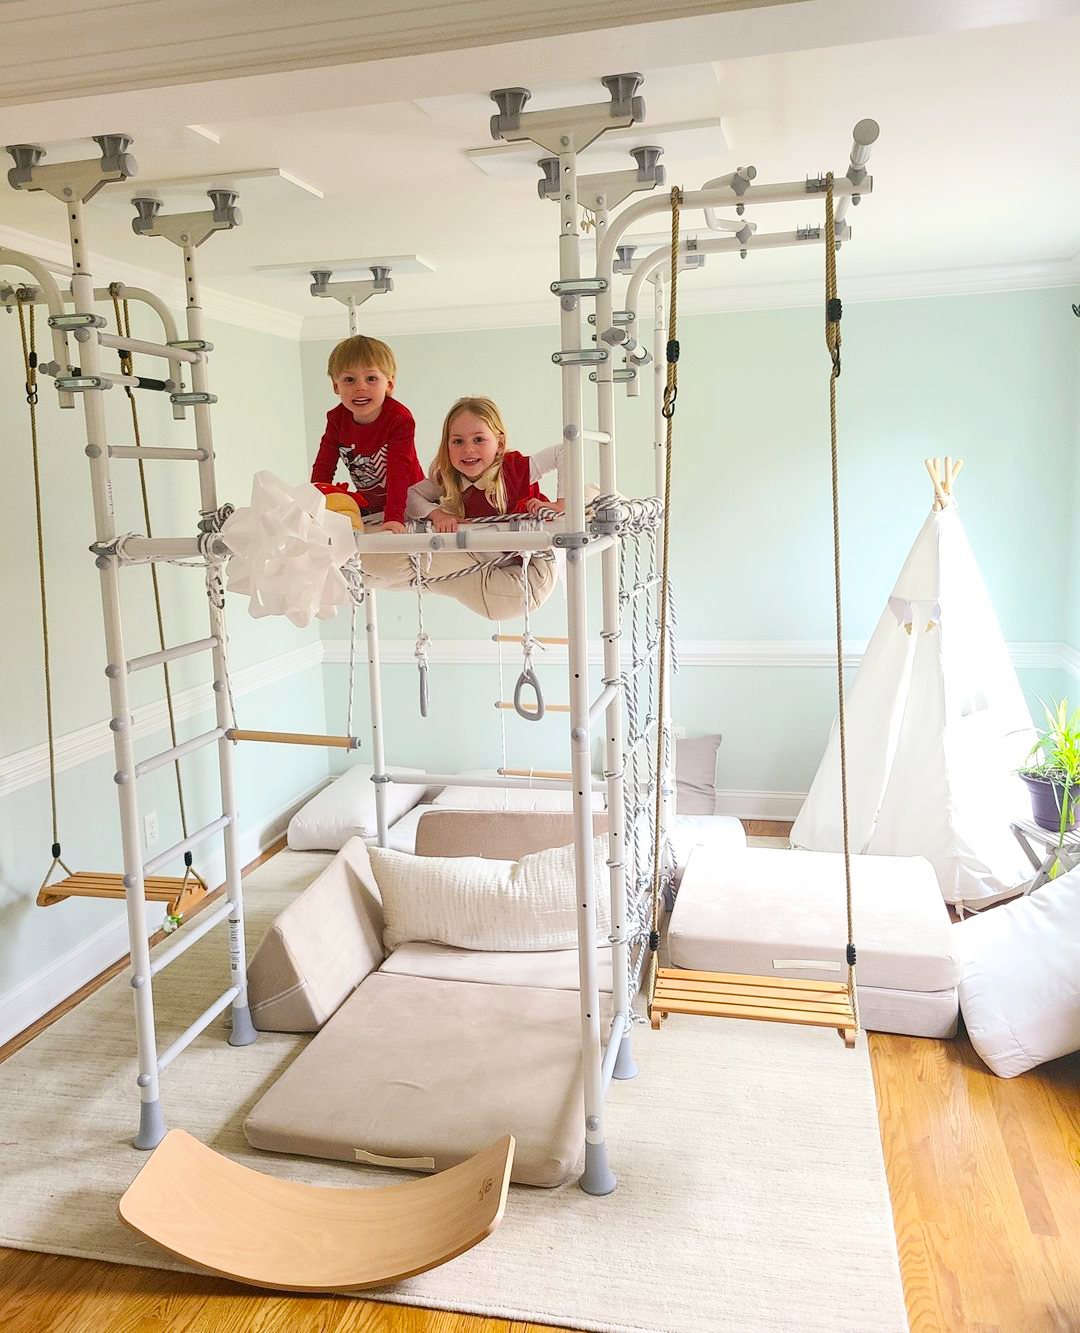 Brainrich Kids Home Play Gym: Your Top FAQs Answered for a Smooth Pre-Order Experience